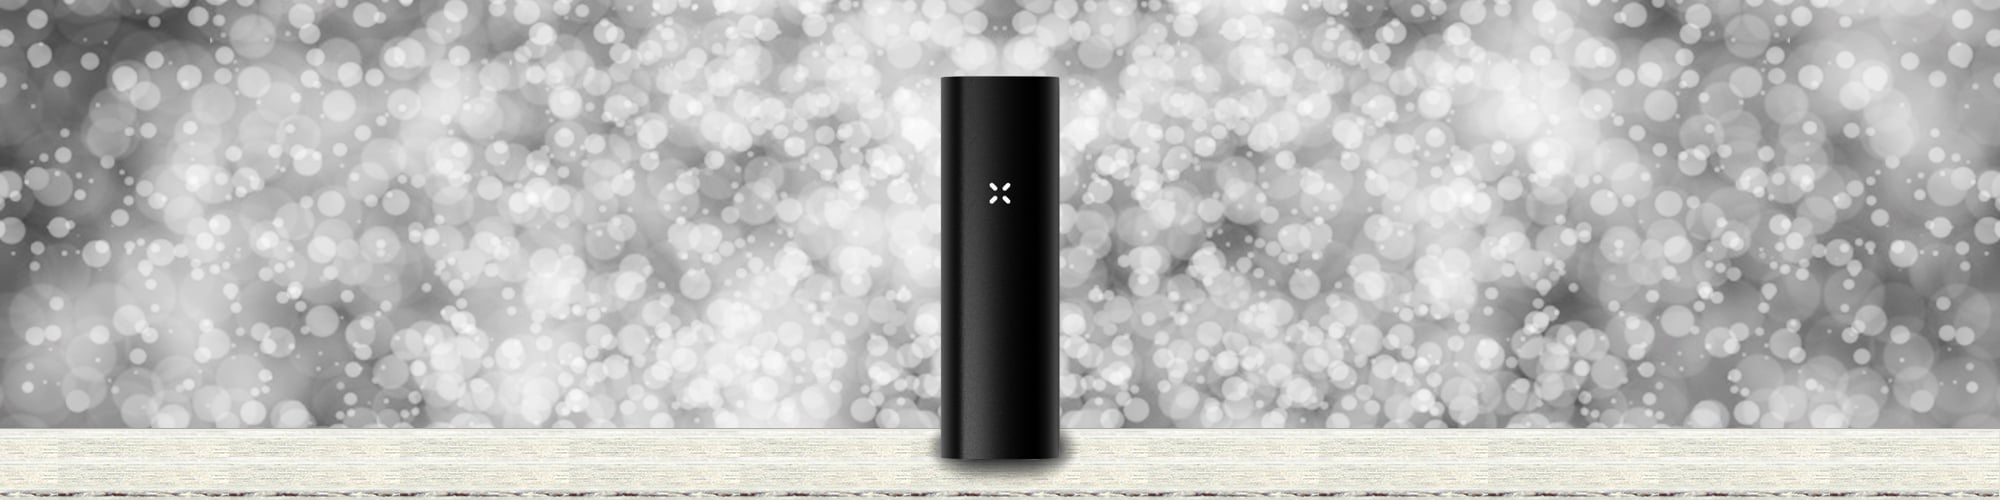 PAX 3 Review Main Banner